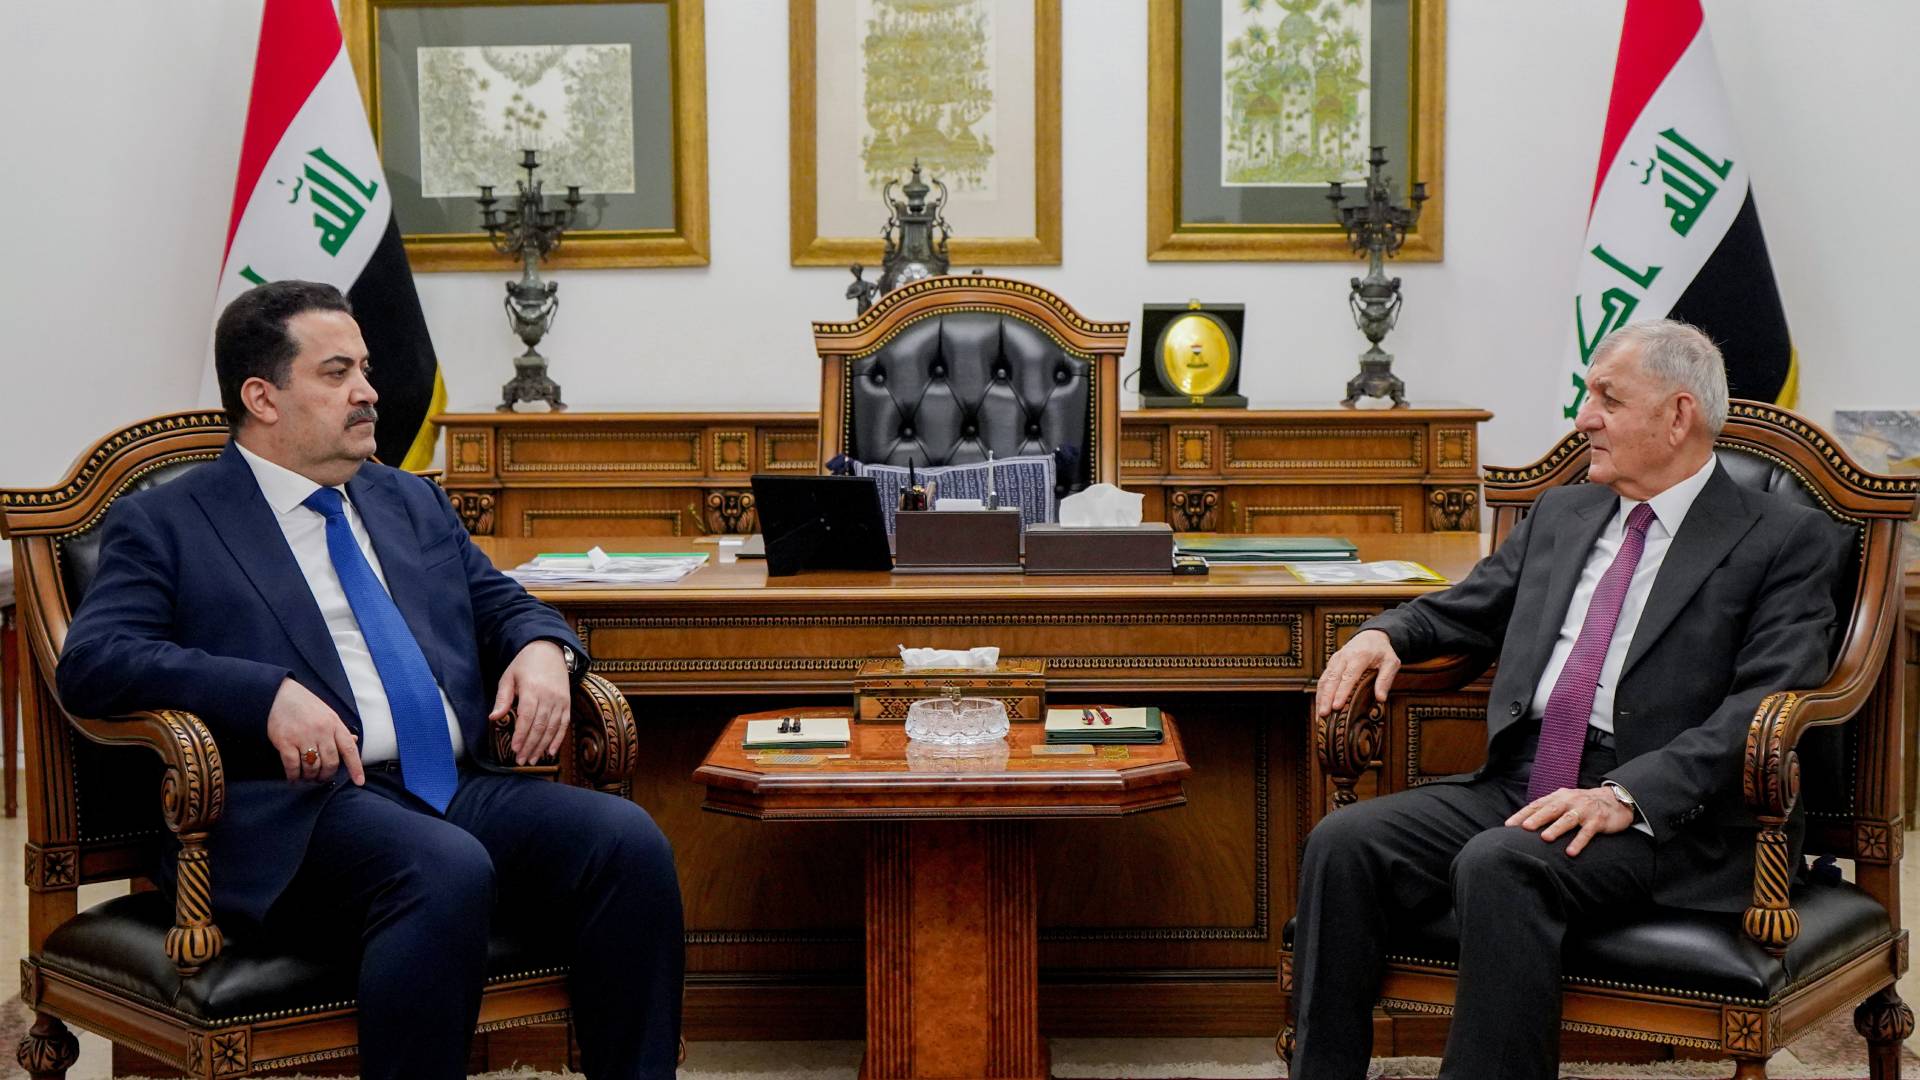  Iraqi President on the right and Iraqi Prime Minister on the left.